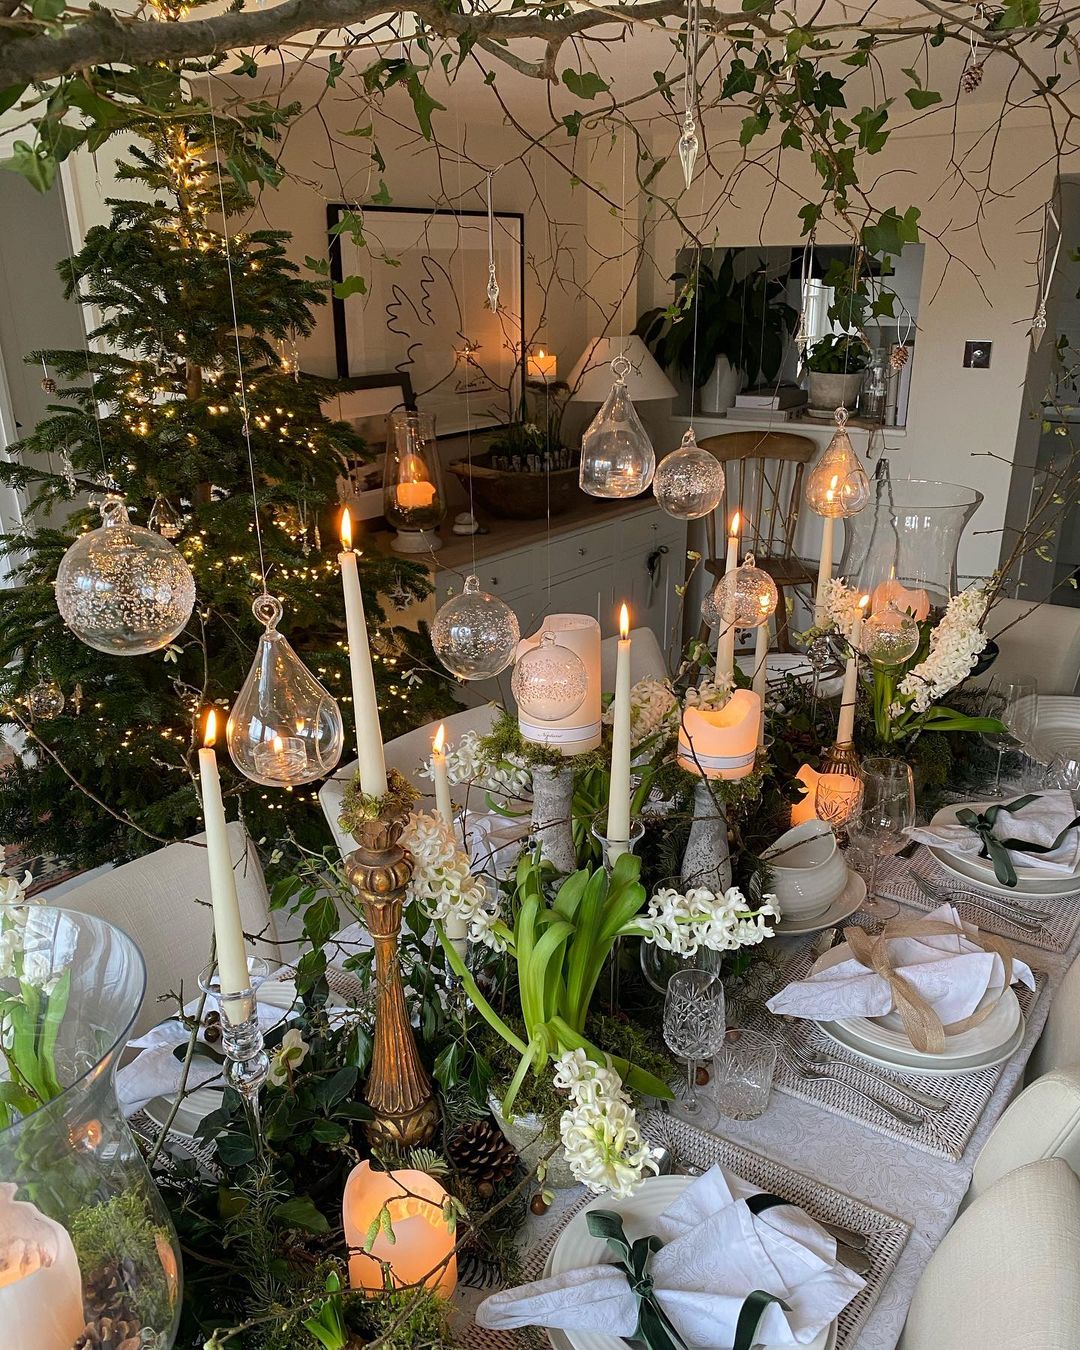 Stunning Christmas tablescape with green foliage